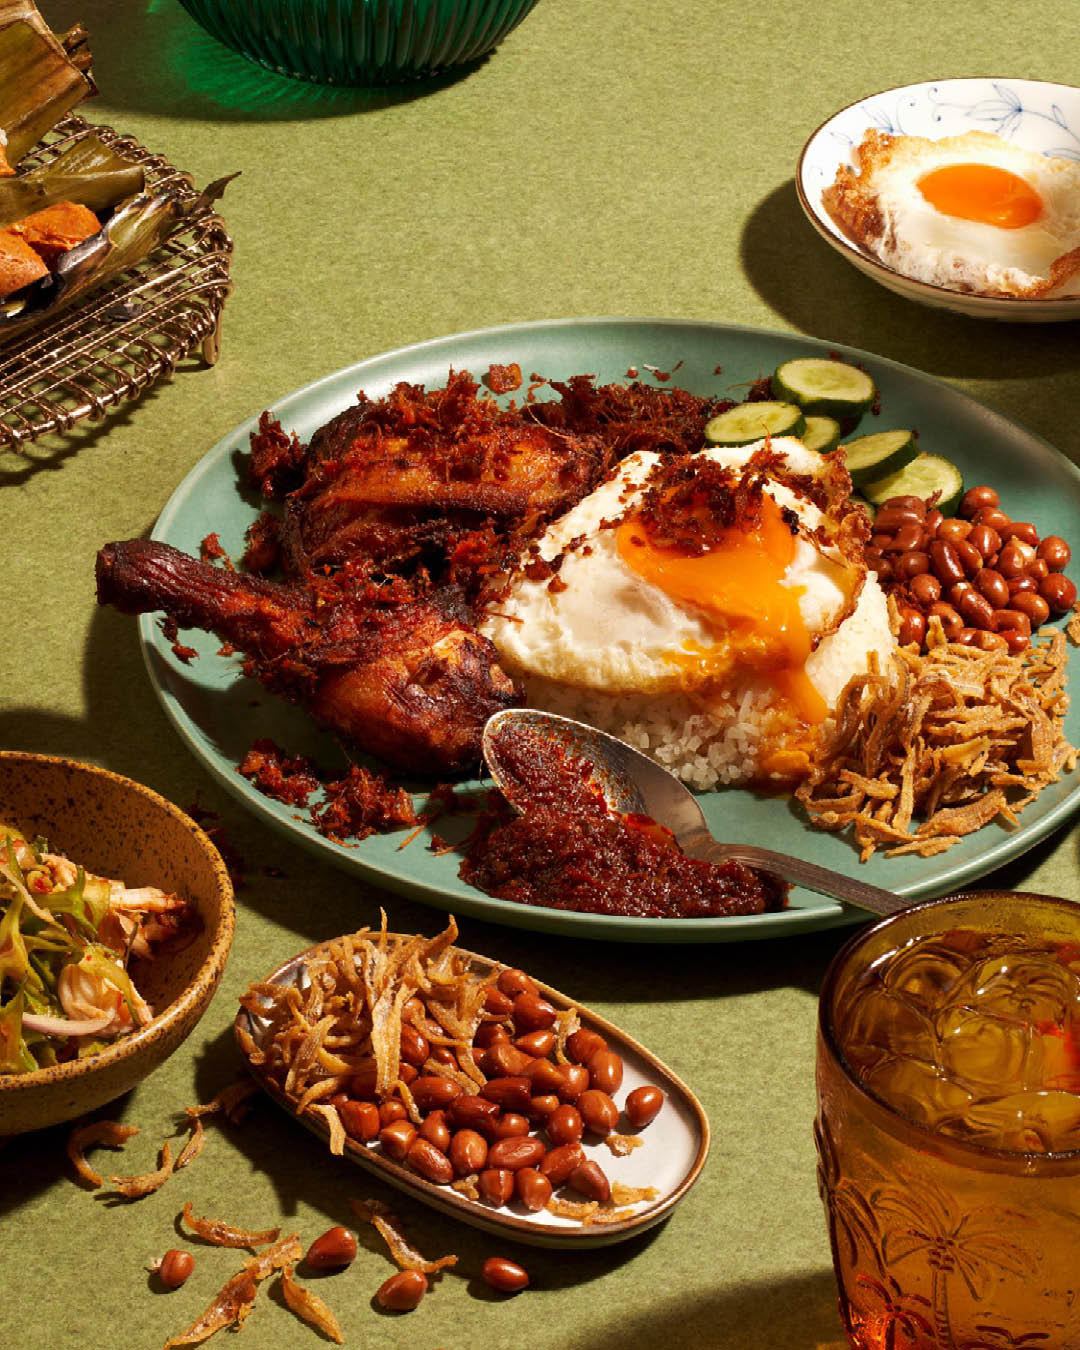 Malay cooking at The Coconut Club restaurant, Singapore